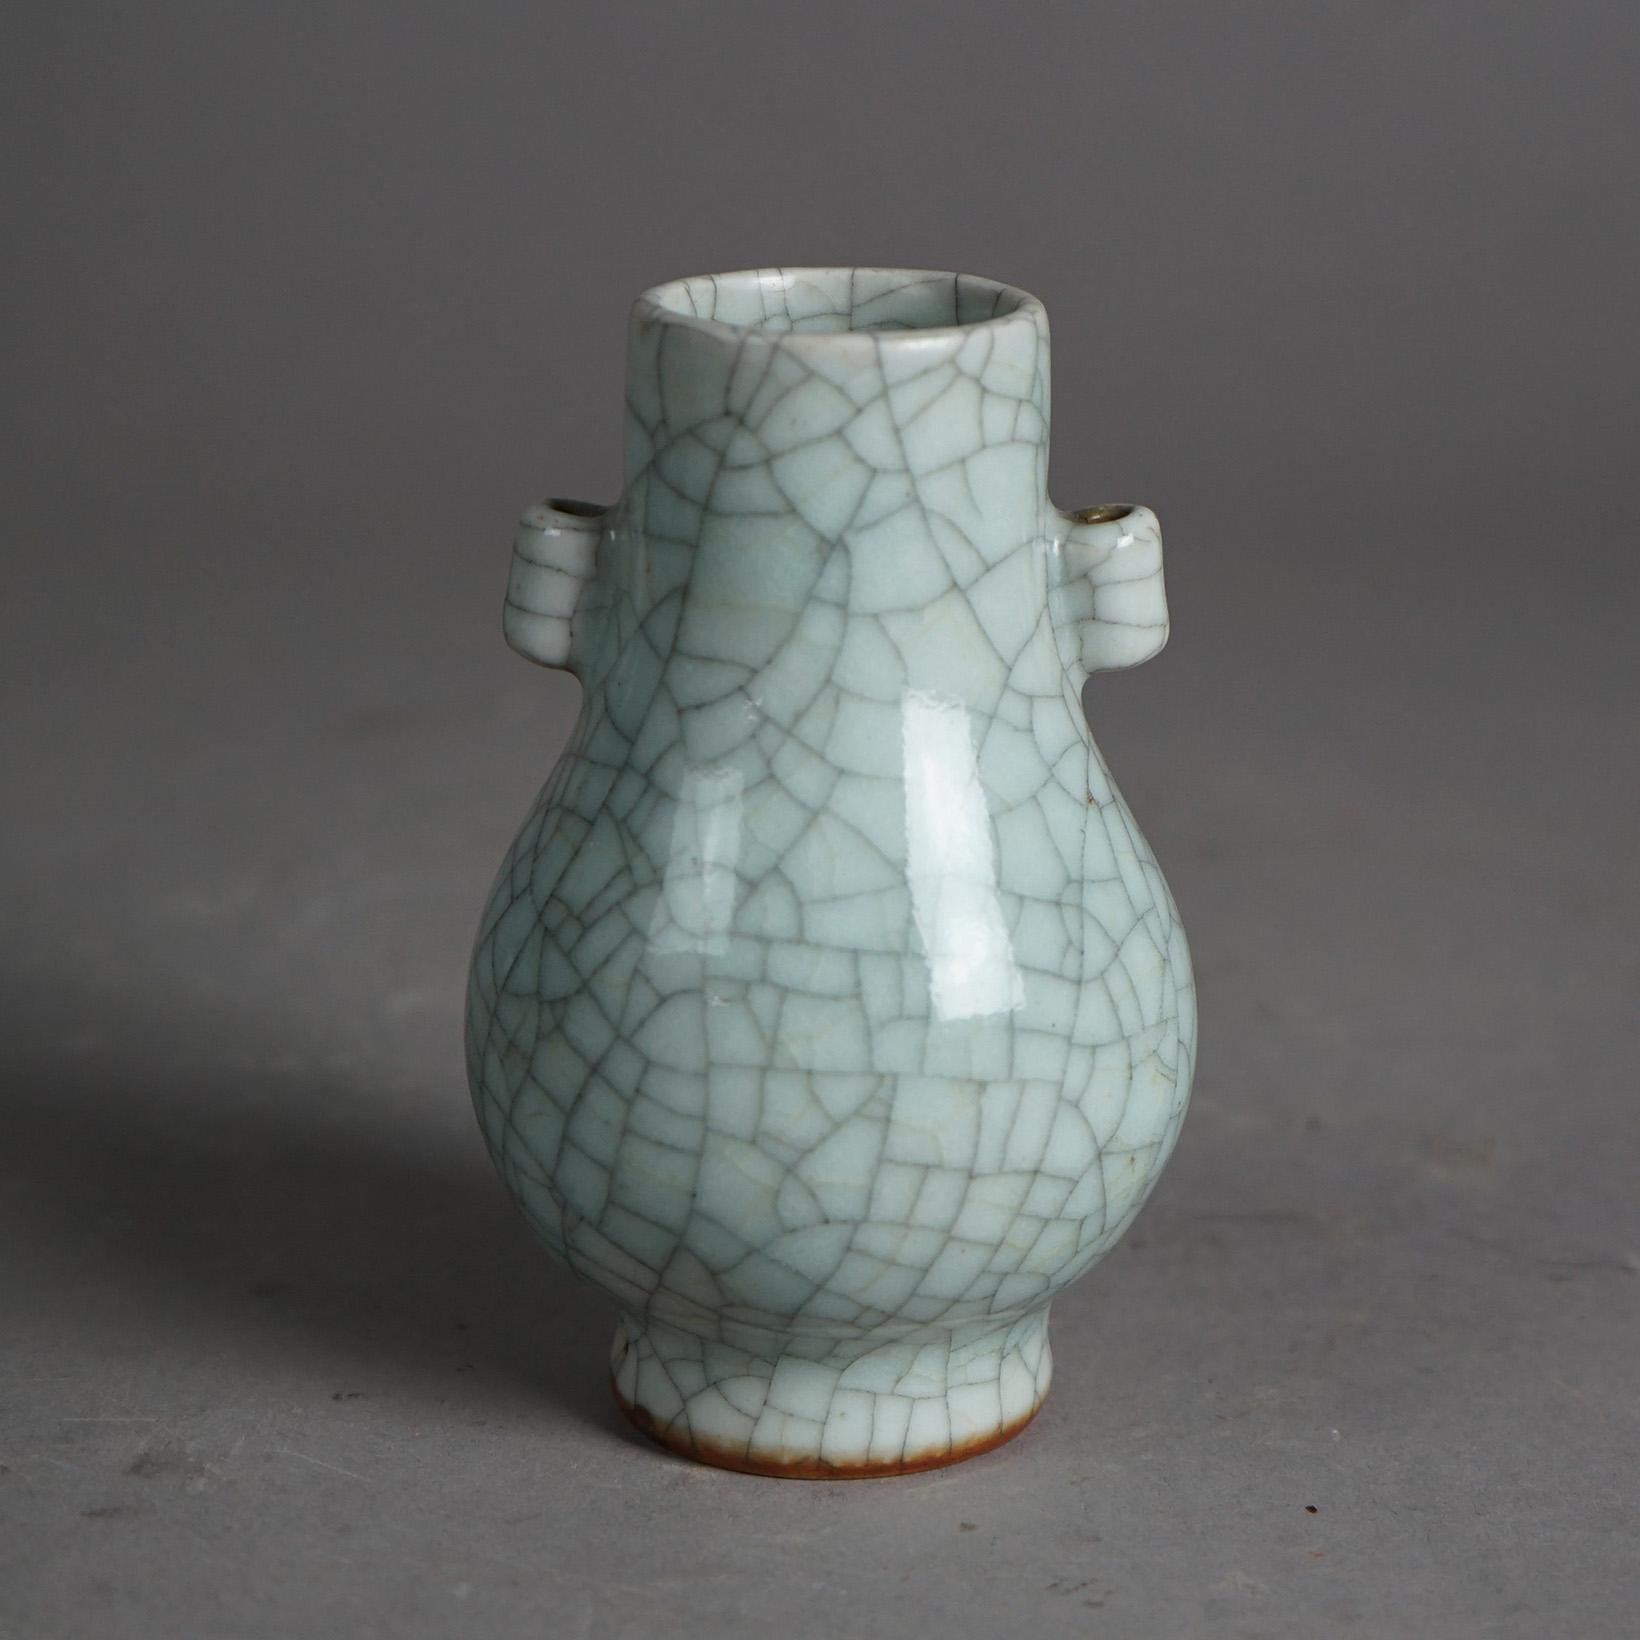 An antique Chinese vase offers art pottery construction with double handles and crackle glaze, c1930

Measures - 5